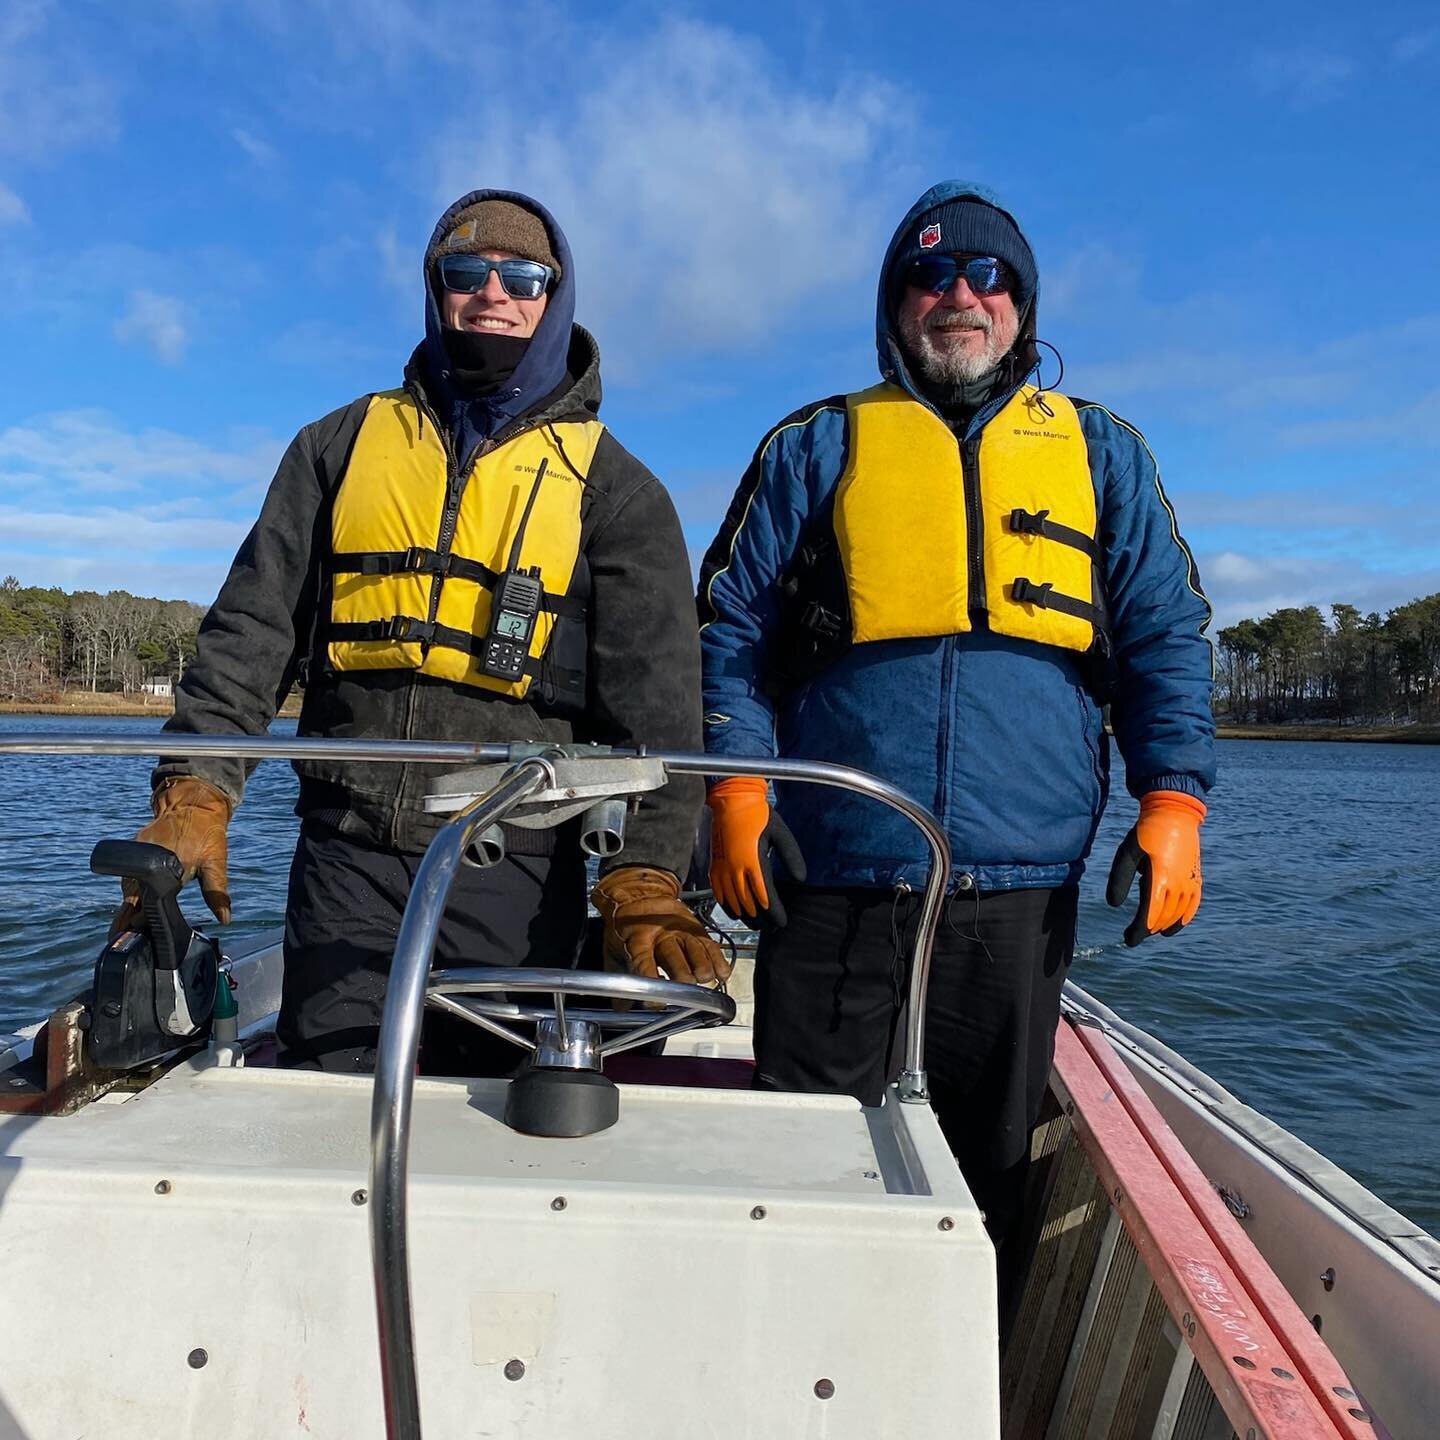 Teamwork makes the dream work, and we are so fortunate to have so many helping hands in our local community! Big thanks to Arey&rsquo;s Pond Boat Yard for getting our volunteers and contractors to the island this week while our boat engine is being r